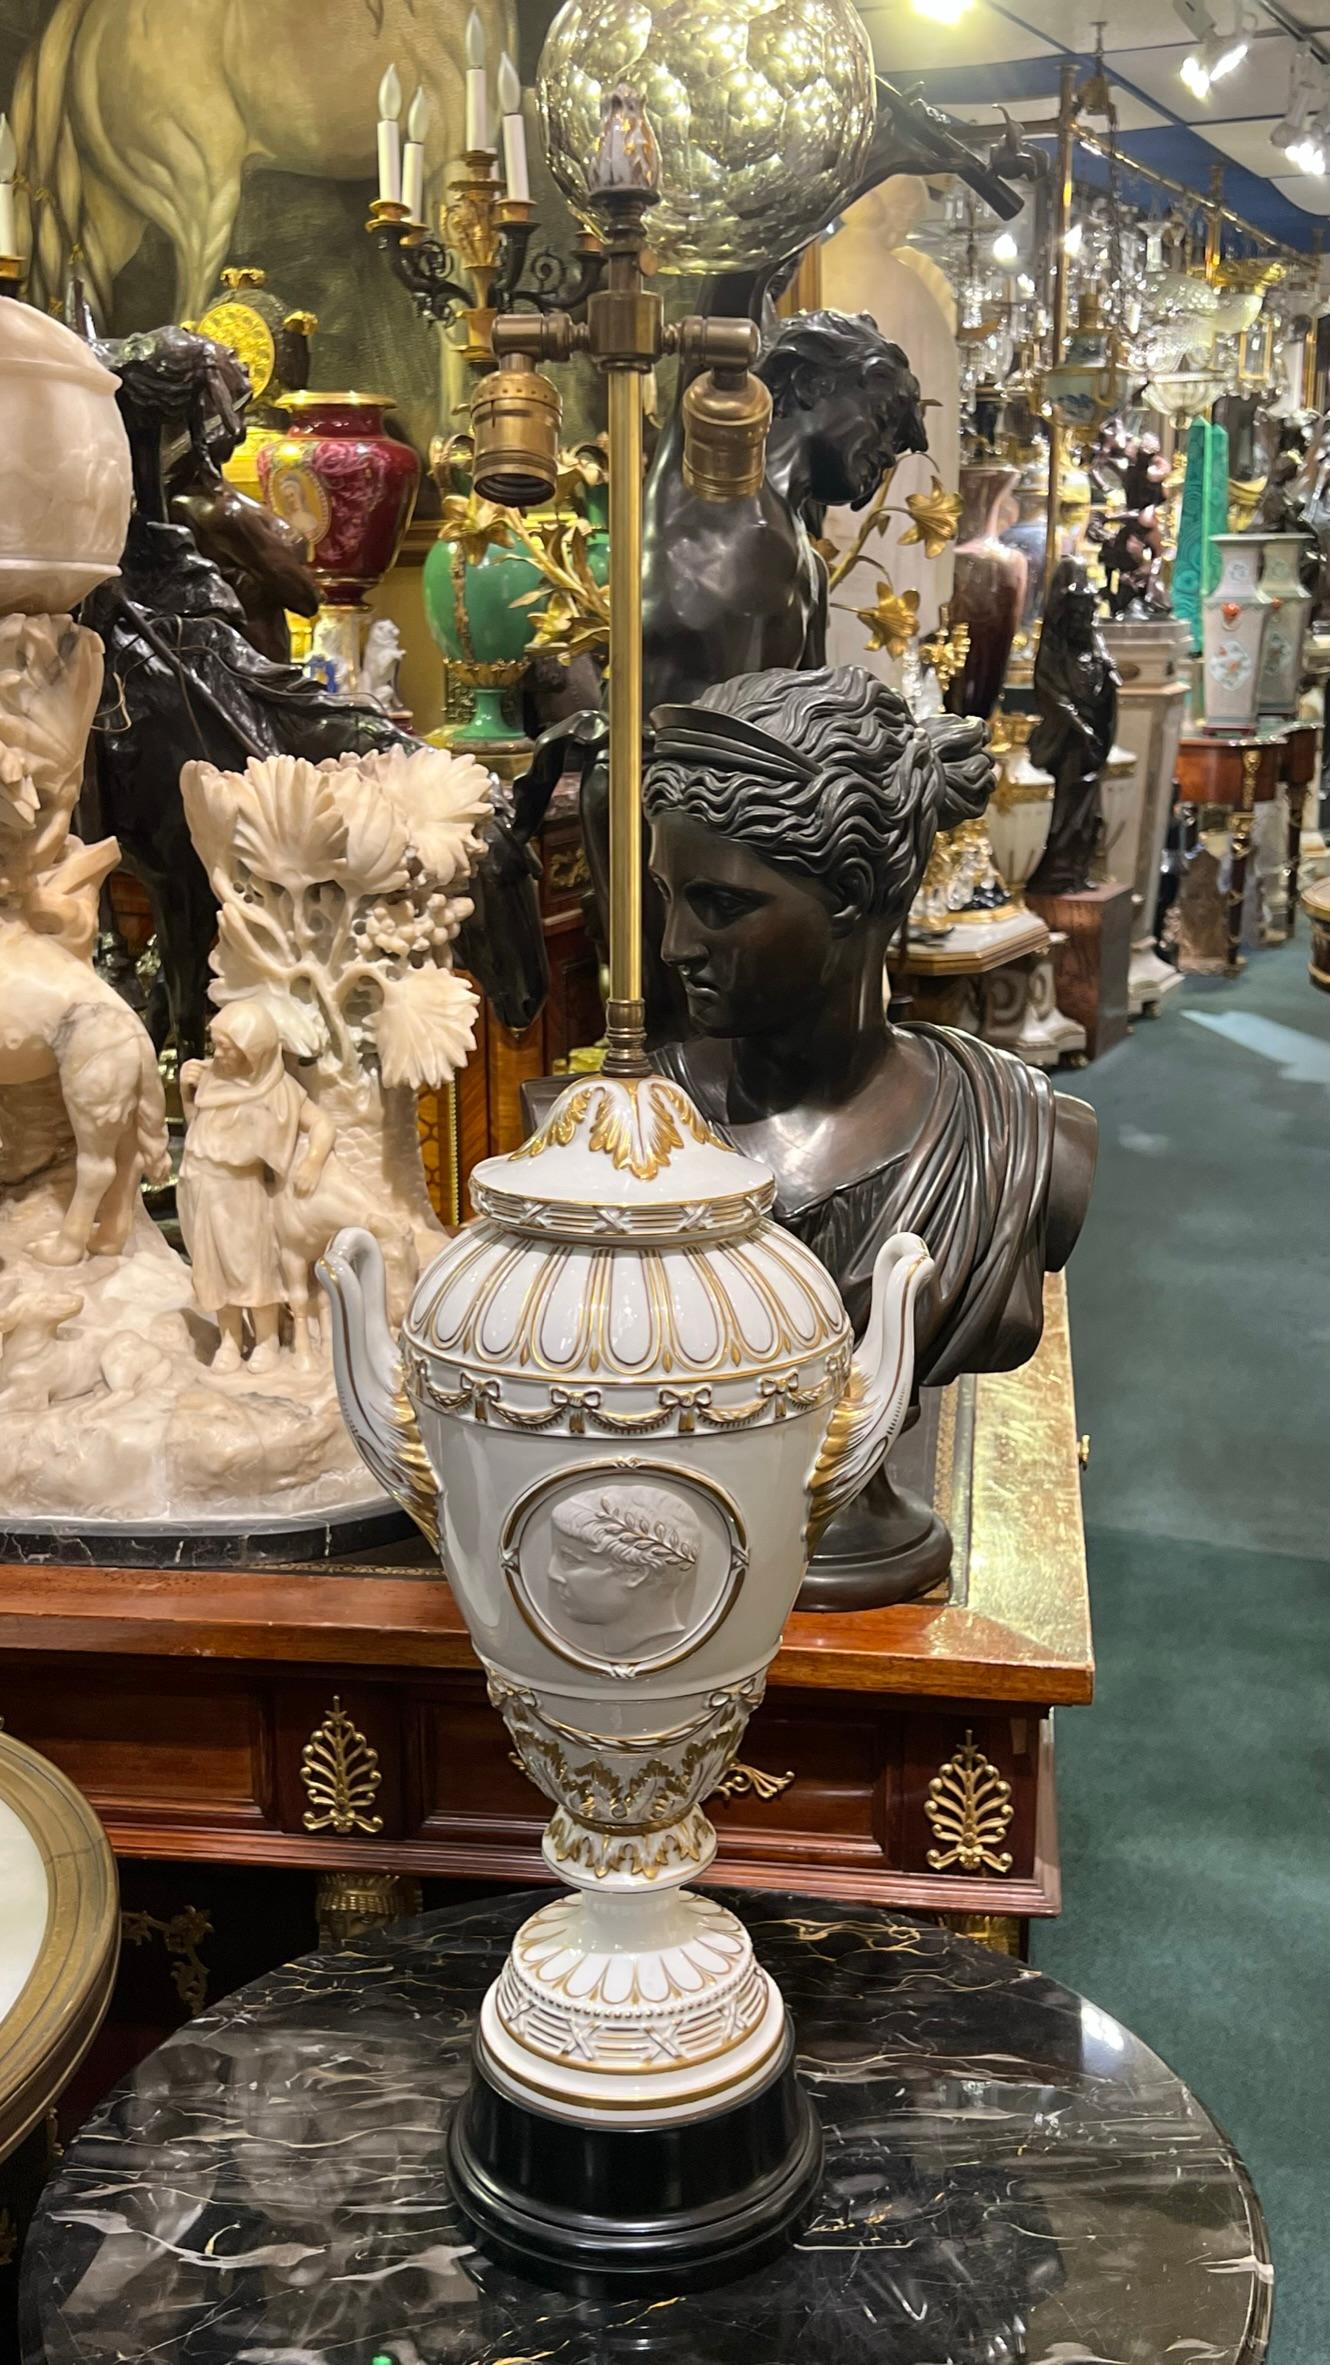 Pair of antique white glazed porcelain vases in the neoclassical empire style mounted as table lamps with tall brass standard with gilt porcelain finials and mounted on ebonized wooden pedestals with circular on/off switches.  Featuring the profiles